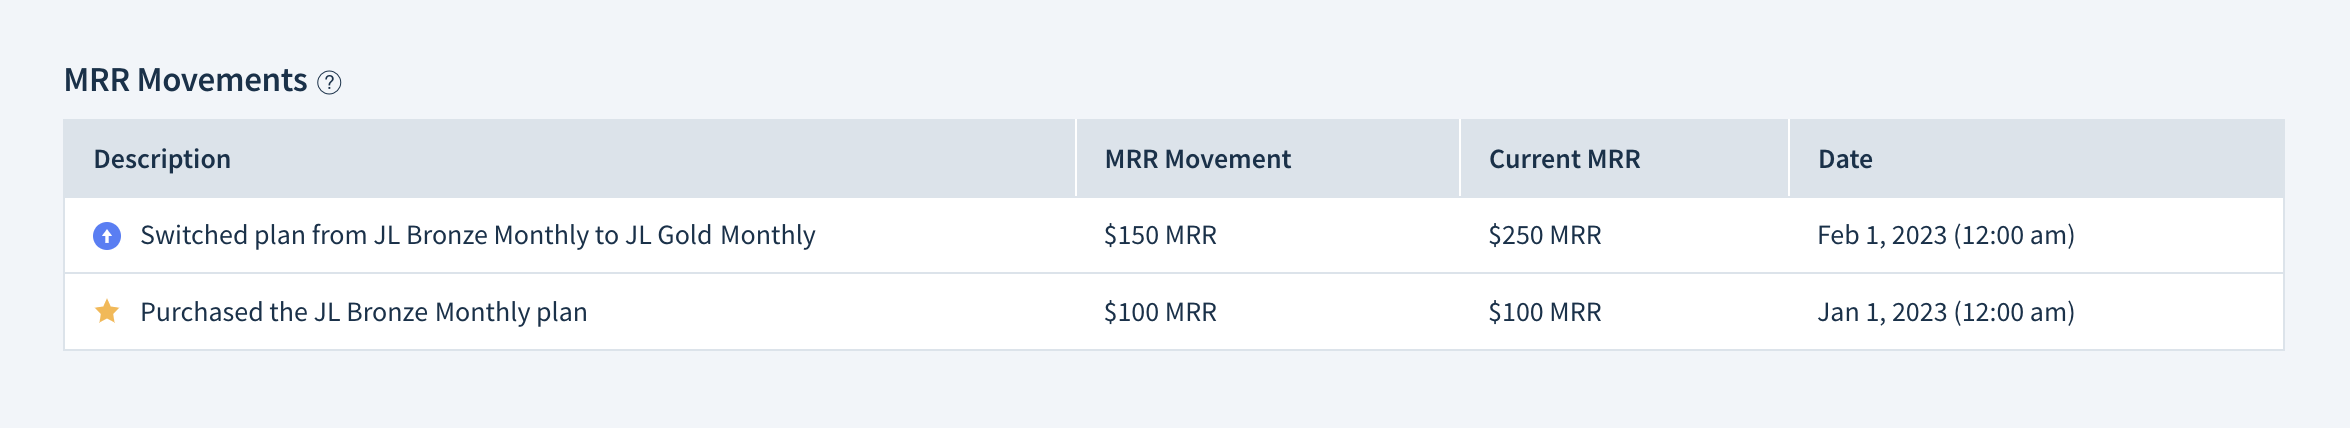 Screenshot of the MRR Movements table. It shows a new business movement of 100 dollars is described as “Purchased the JL Bronze Monthly plan” on January 1st, 2023. Current MRR after this movement is 100 dollars. On February 1st, there’s an expansion of 150 dollars described as “Switched plan from JL Bronze Monthly to JL Gold Monthly”. Current MRR after this movement is 250 dollars.